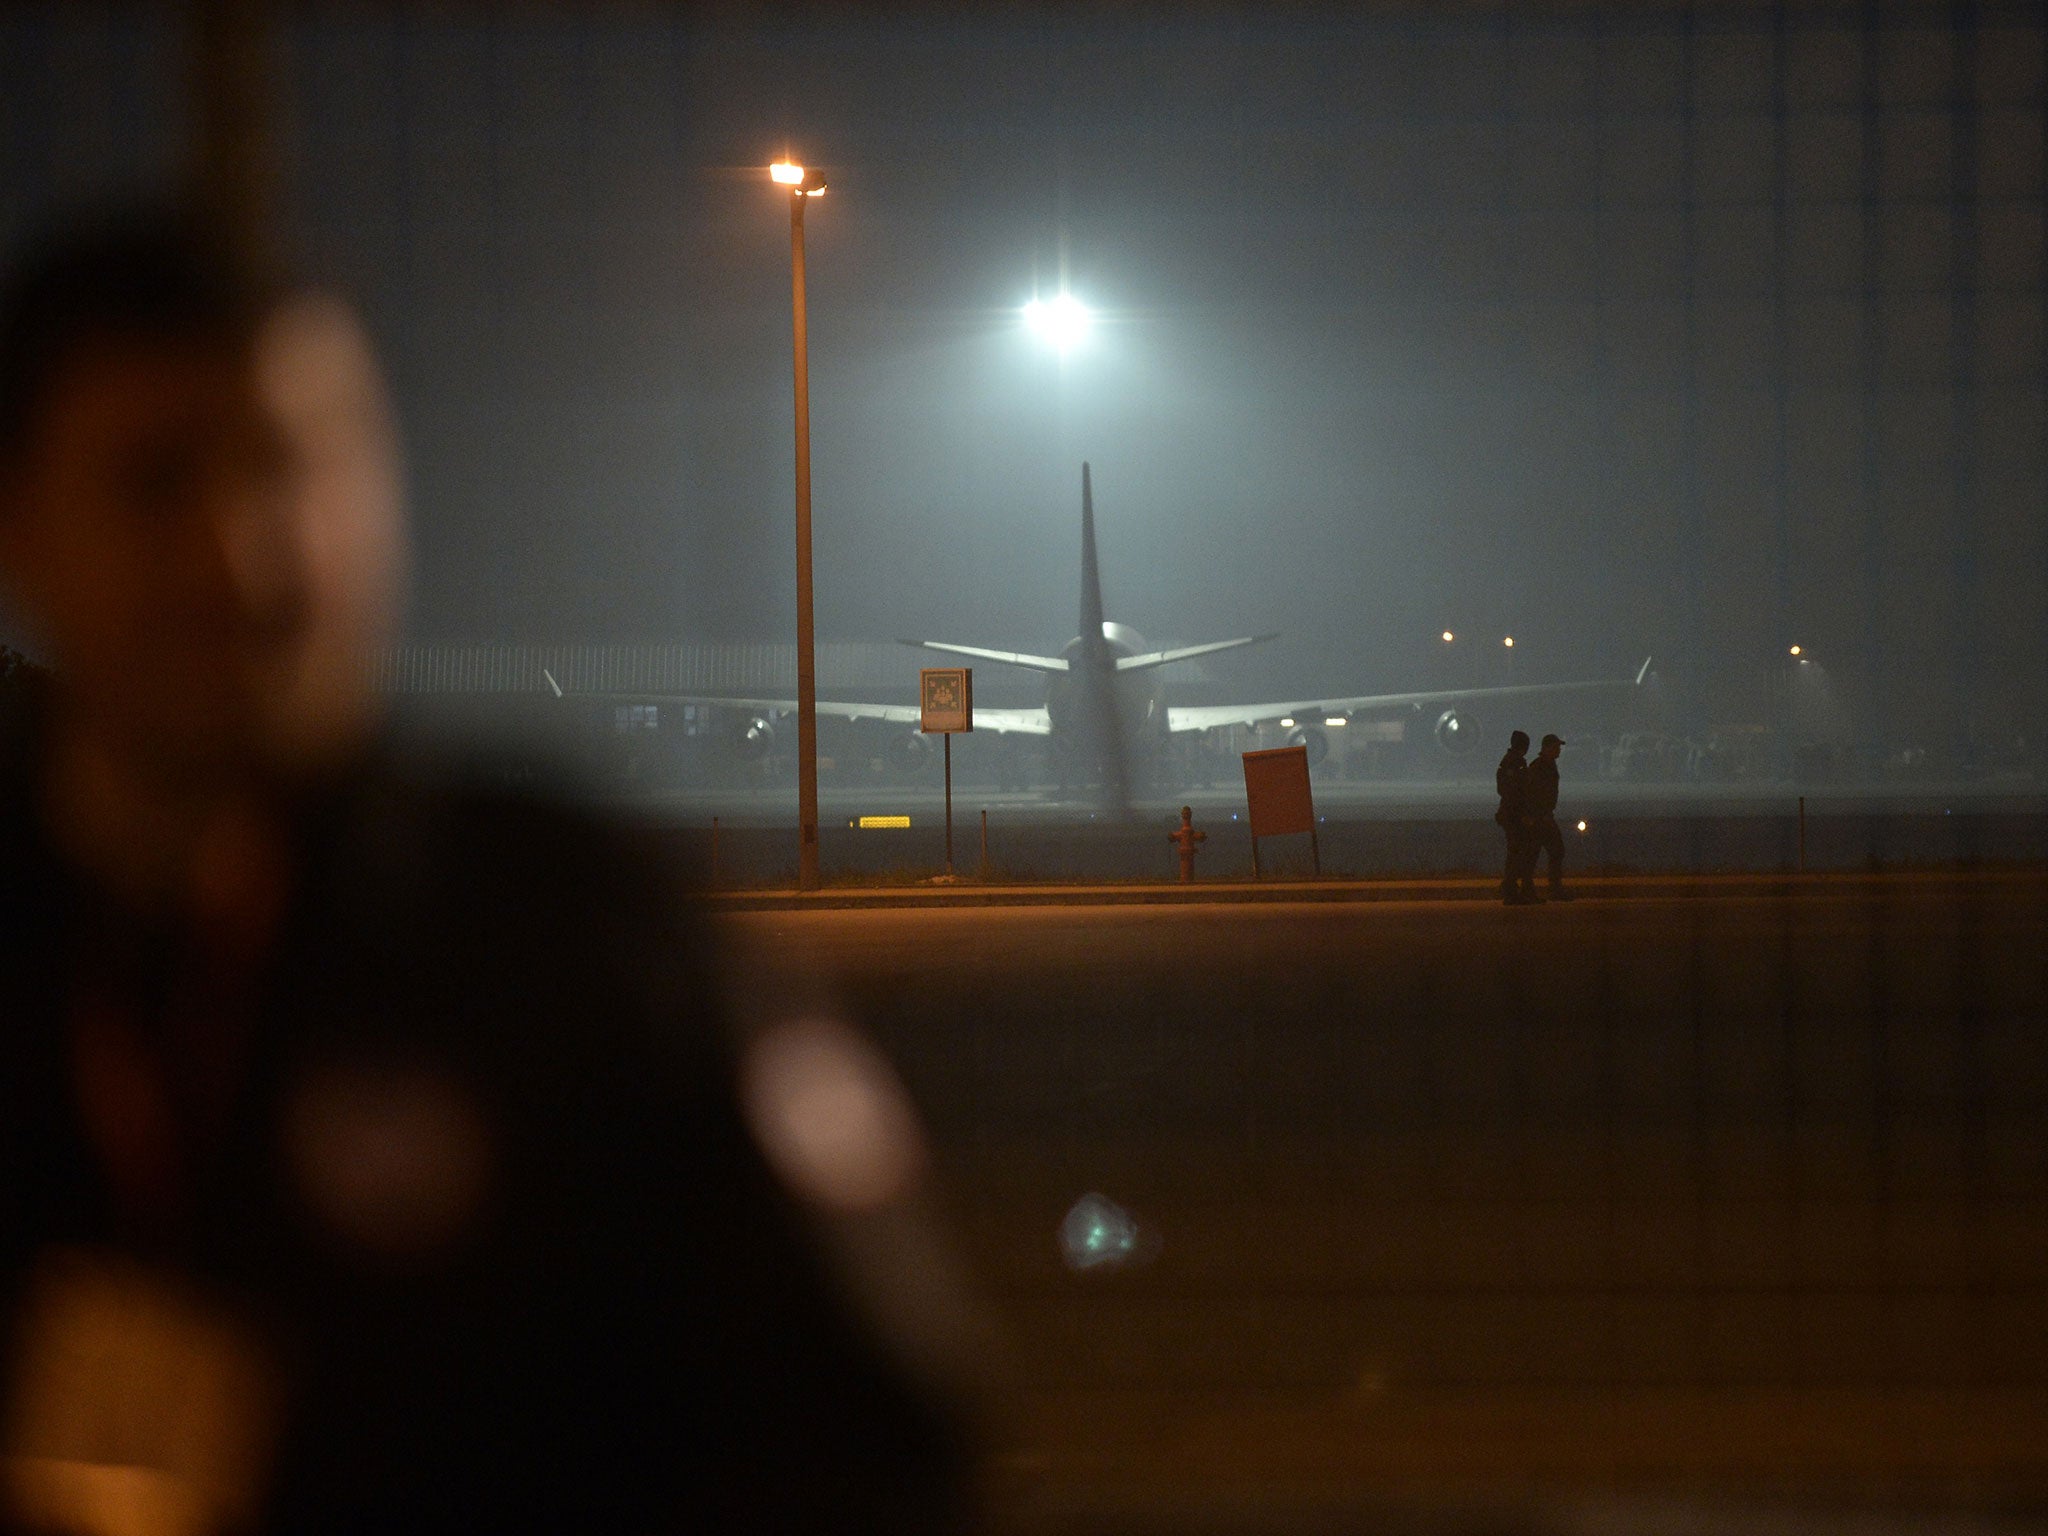 The men were reportedly stopped by security forces in Istanbul airport